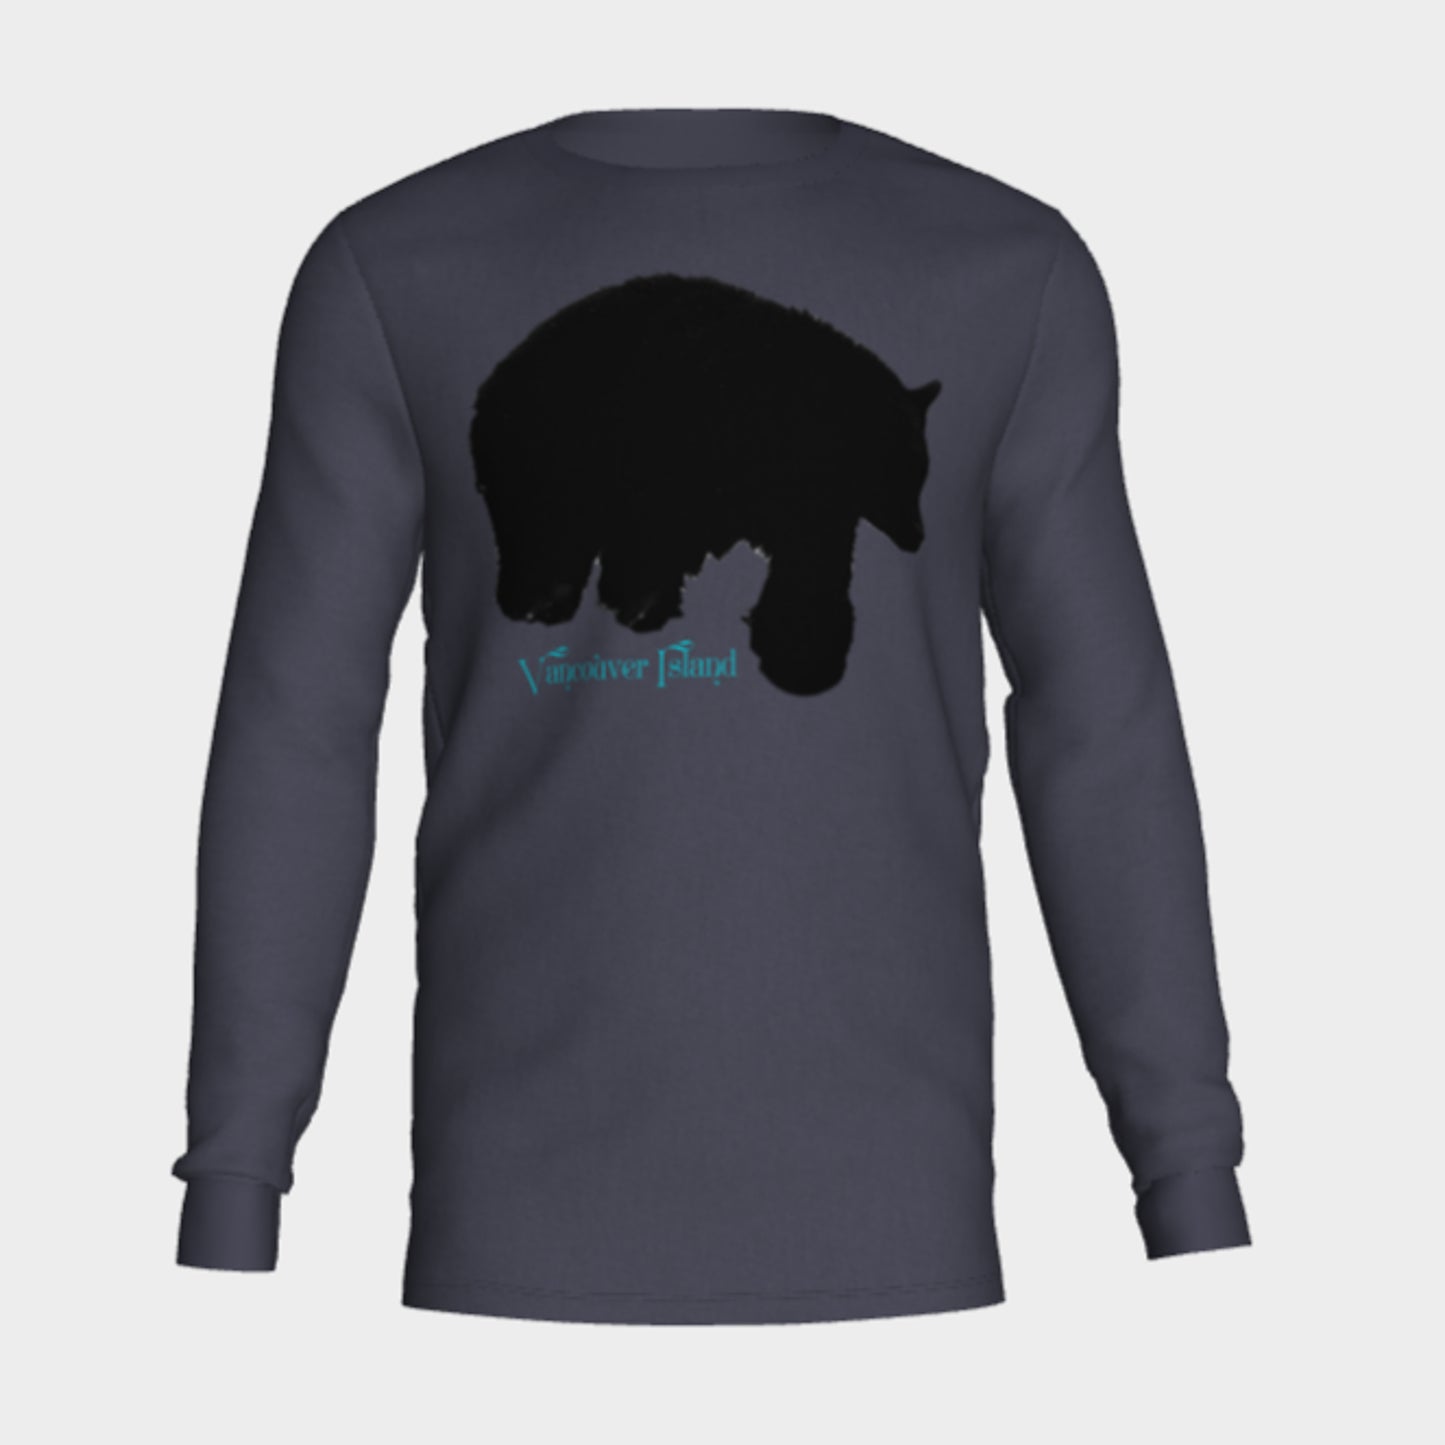 Bear Vancouver Island Long Sleeve Unisex T-Shirt Van Isle Goddess 100% cotton crew neck long sleeve super comfy tee is a must-have basic for any wardrobe.  Whether you’re going to a gig, a sports game, a rally, or just walking down the street, this lightweight, 100% cotton crew neck is perfect!  Features:  Flattering unisex fit Cozy long sleeves Crew neck Made with Milltex lightweight fabric